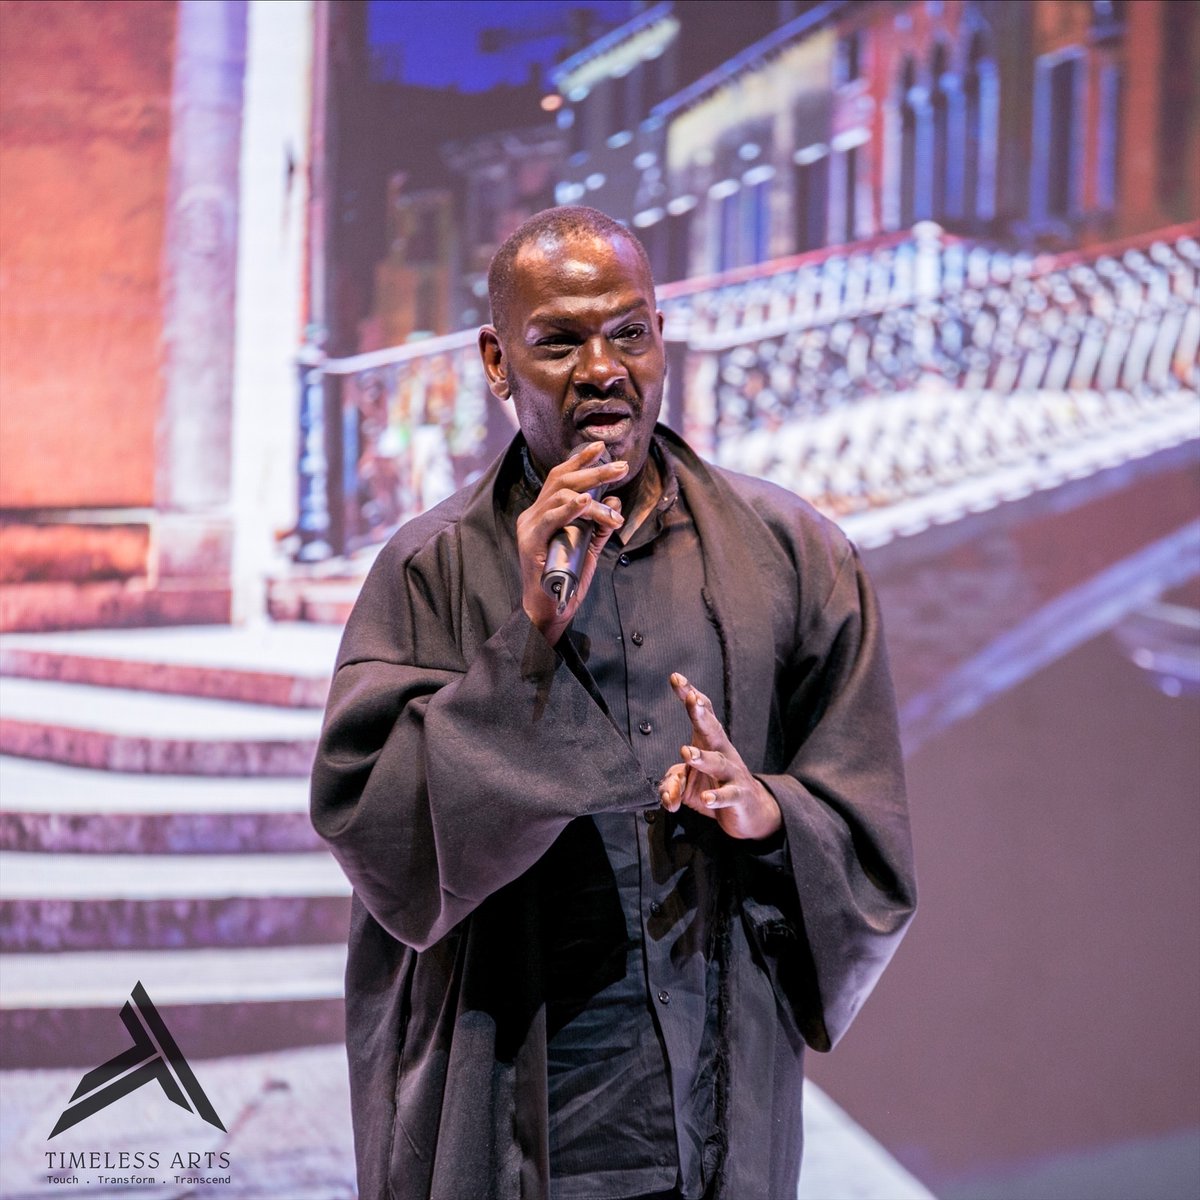 Joseph Atukunda is a mental health champion and founder of HeartSounds Uganda. From battling personal struggles to shining on stage, he has proven that resilience knows no bounds.

#ManCrushMonday 
#MotivationalMonday
#TheMerchantOfVeniceUg
#TheatreForMentalHealth
#TimelessArts